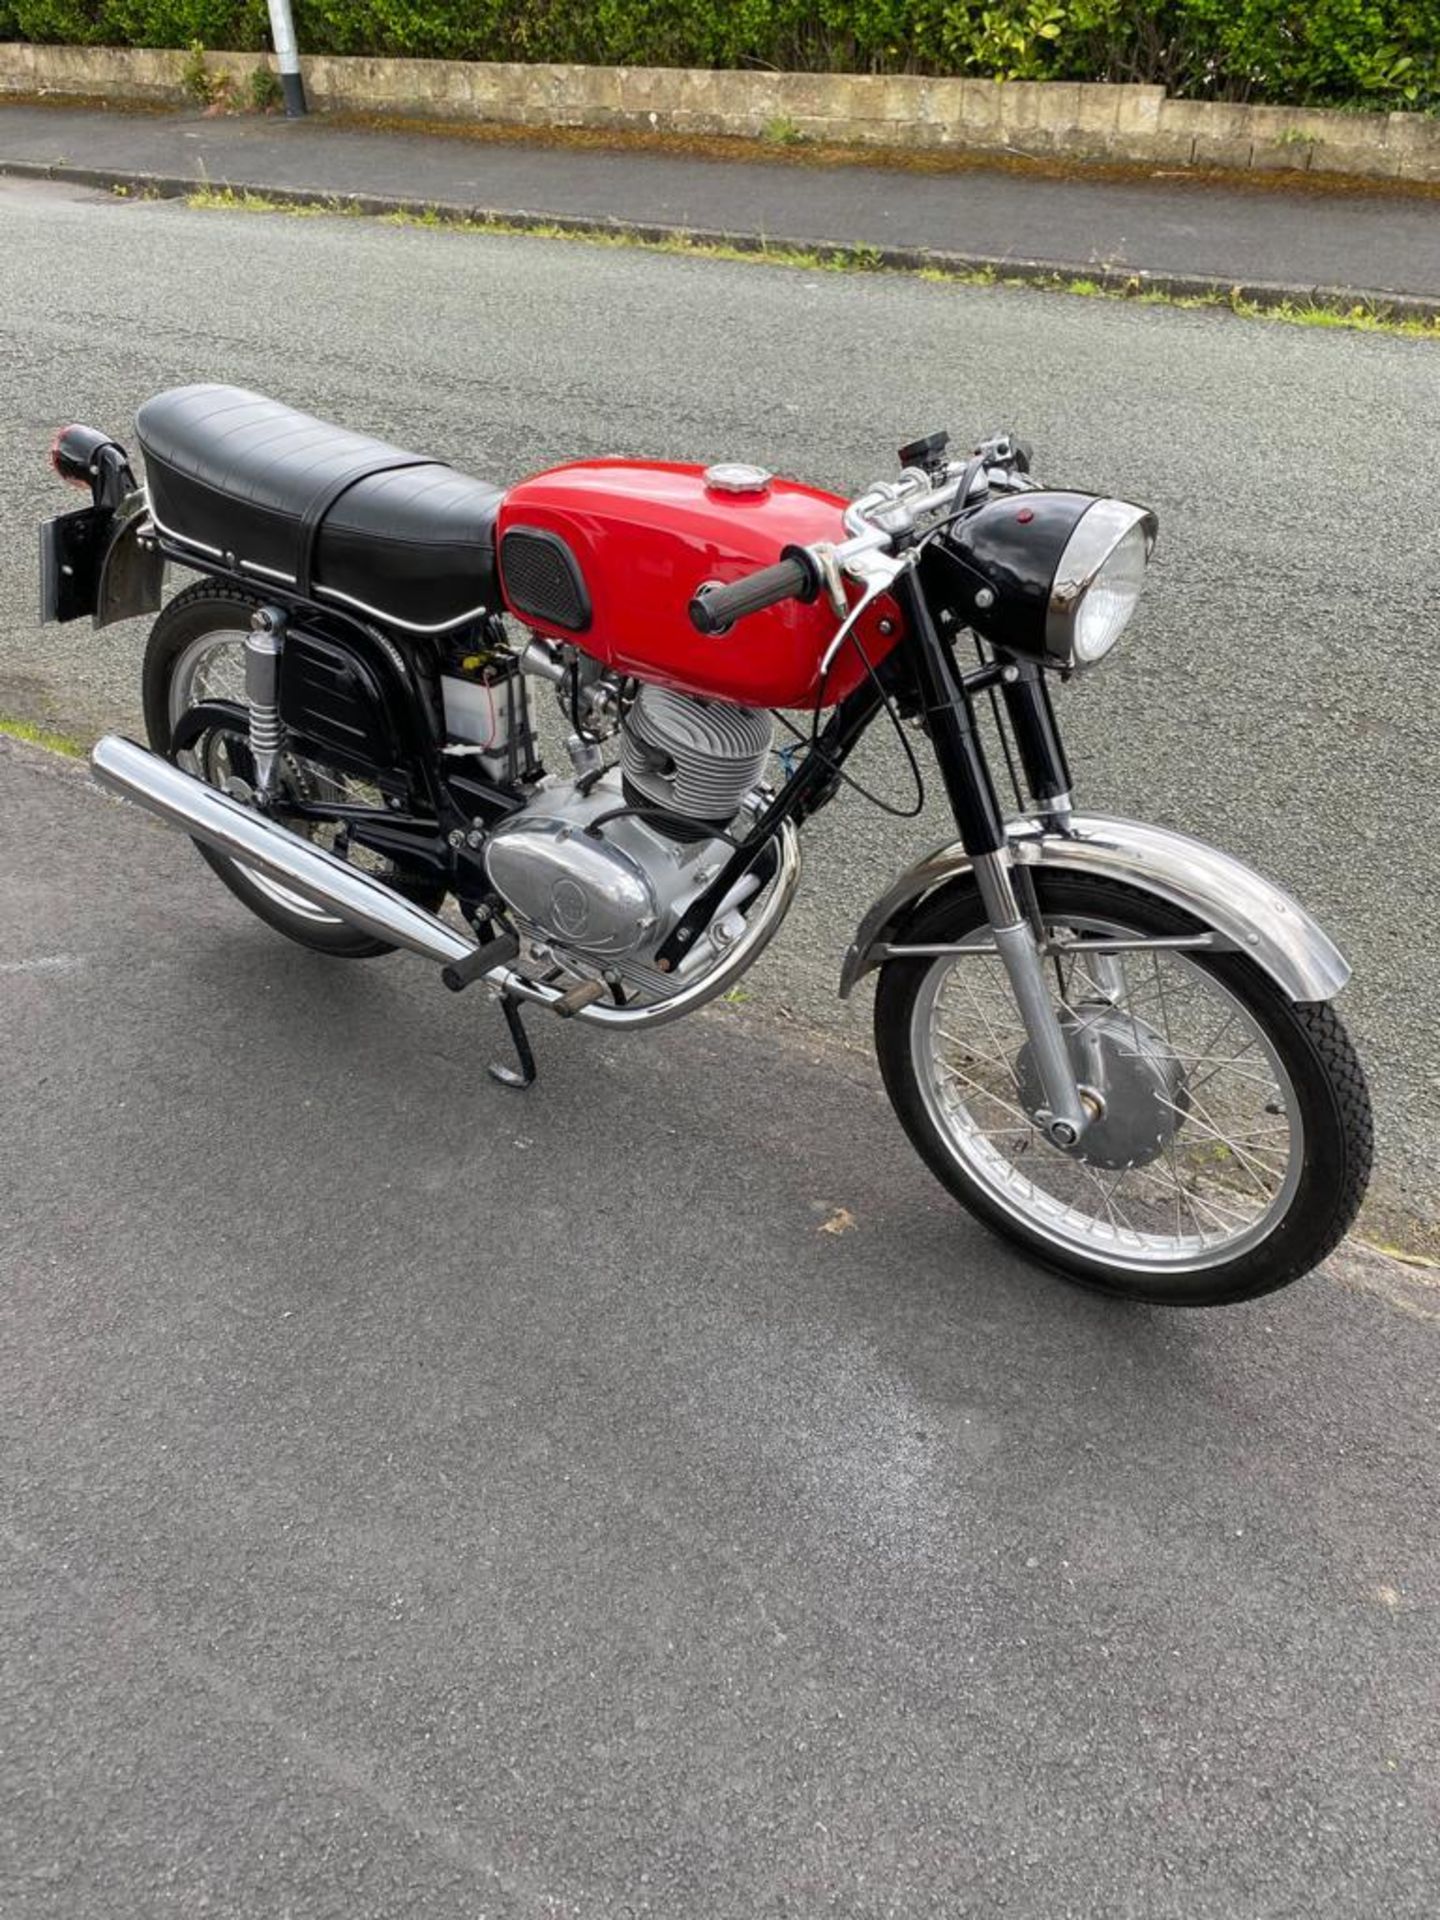 A 1966 GILERA 124 SPORT MOTORCYCLE, OHV, 5 SPEED, MATCHING FACTORY NUMBERS, IMPORTED IN APPROX